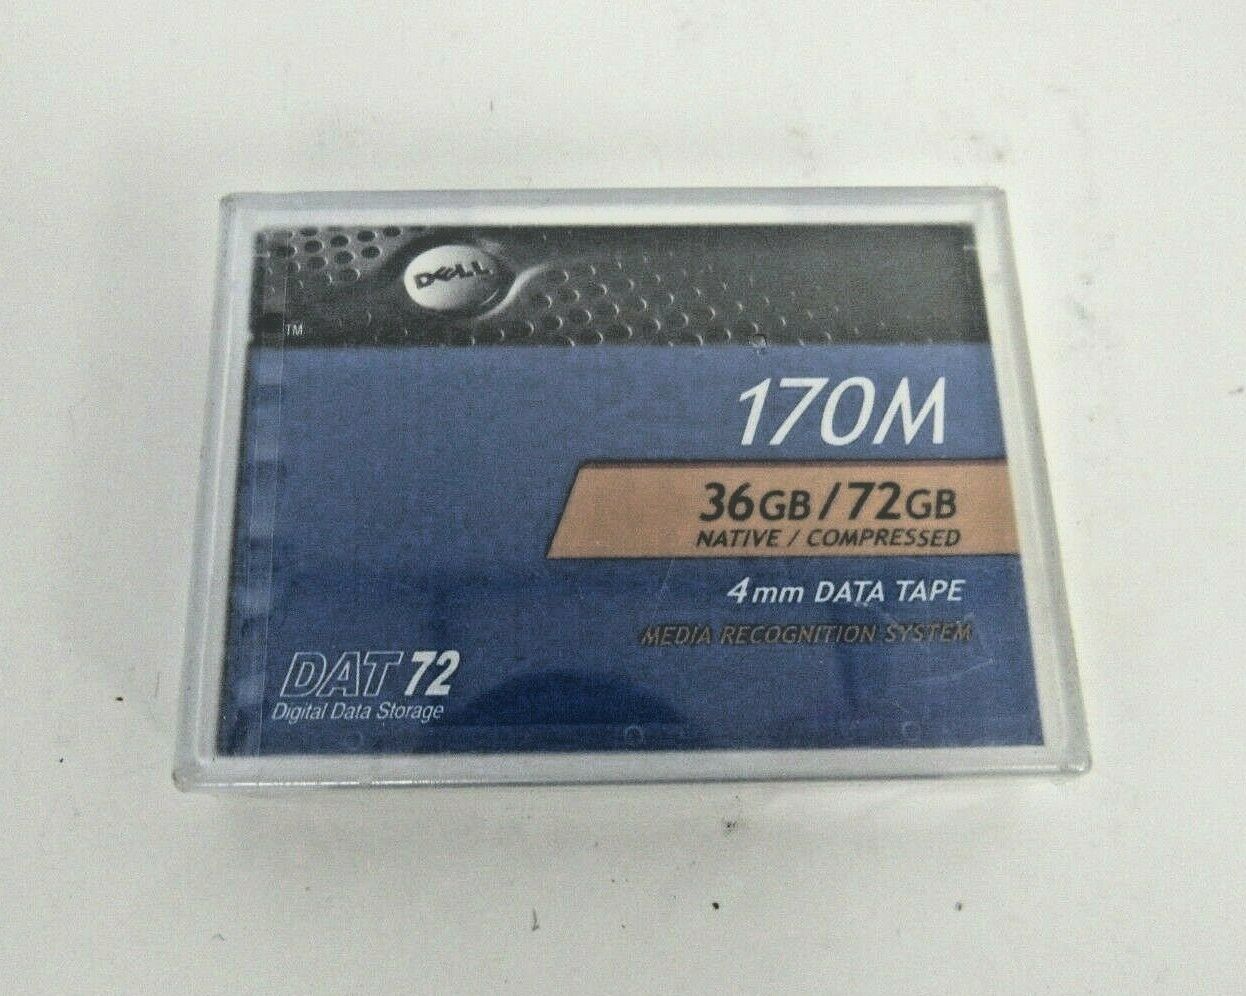 Primary image for Dell 0W3552 New 170M 36GB/72GB 4mm DAT72 DDS-5 Data Cassette C-4